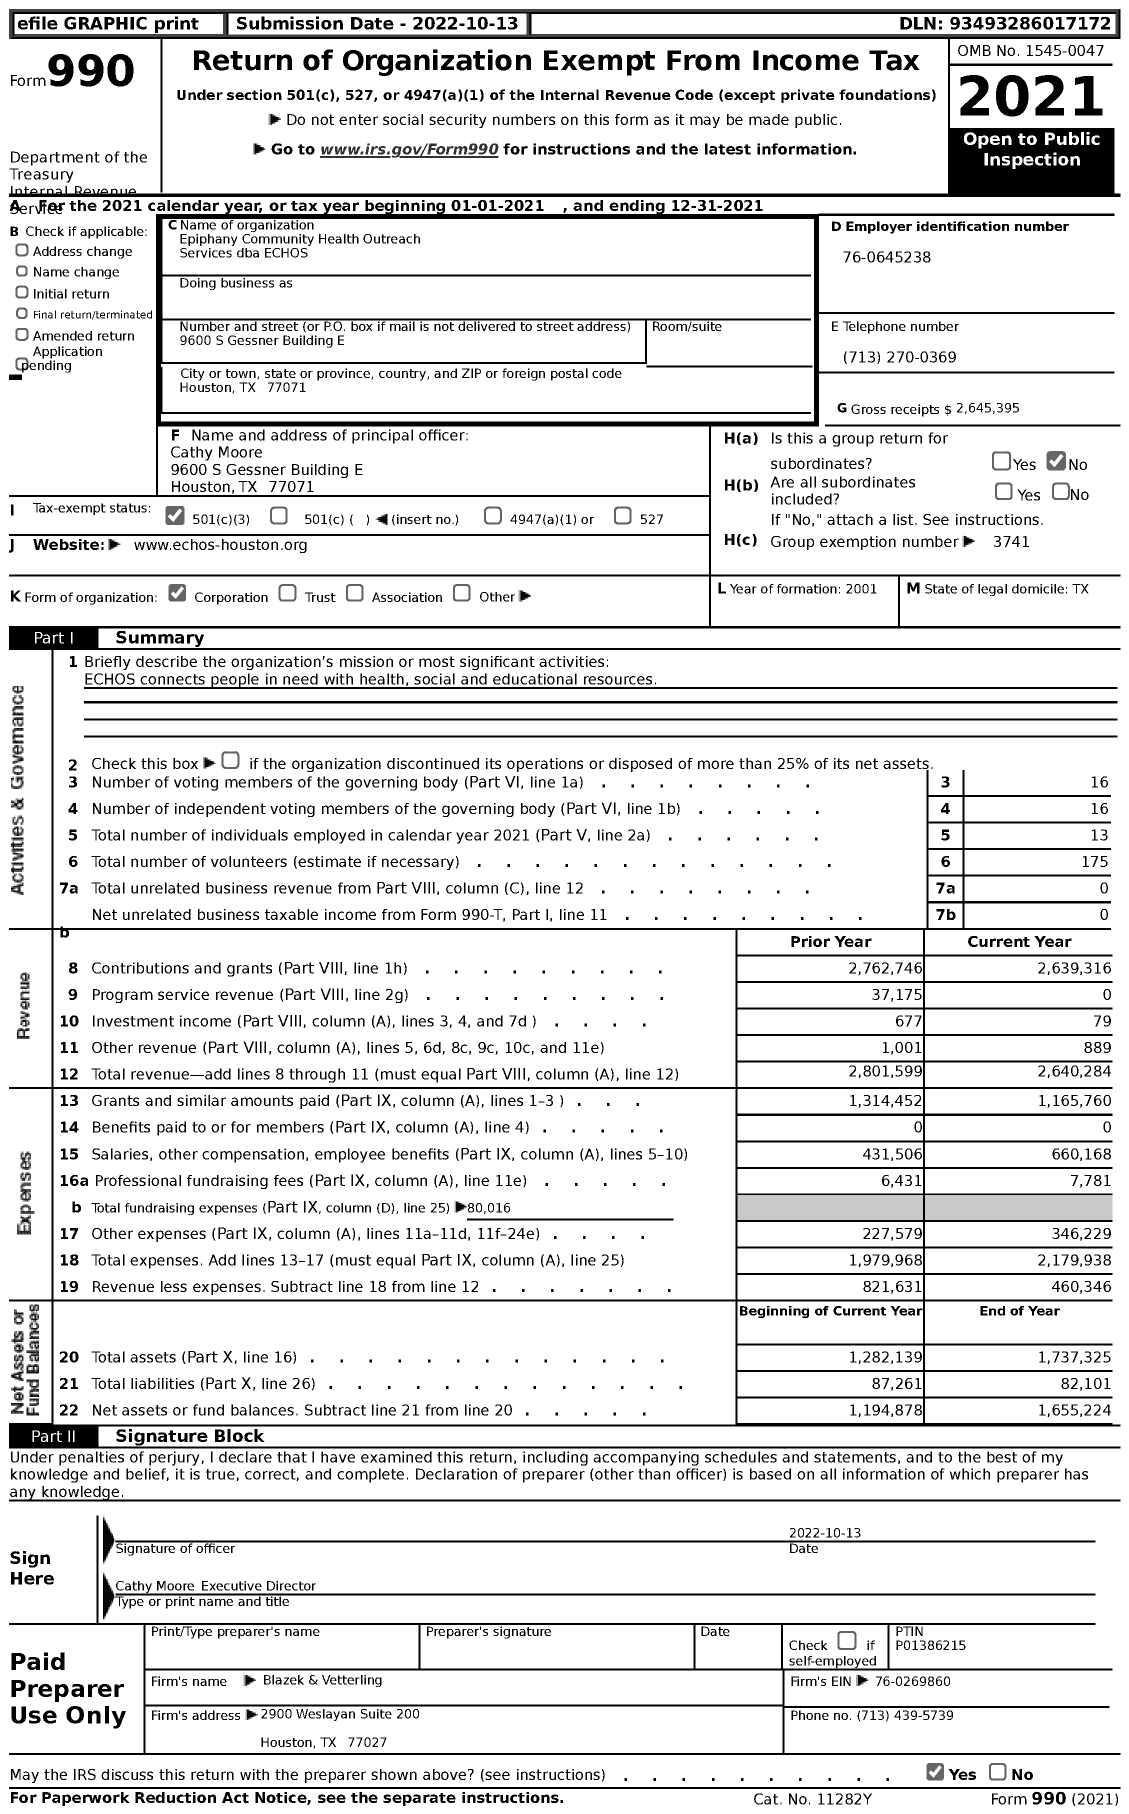 Image of first page of 2021 Form 990 for Epiphany Community Health Outreach Services dba (ECHOS)